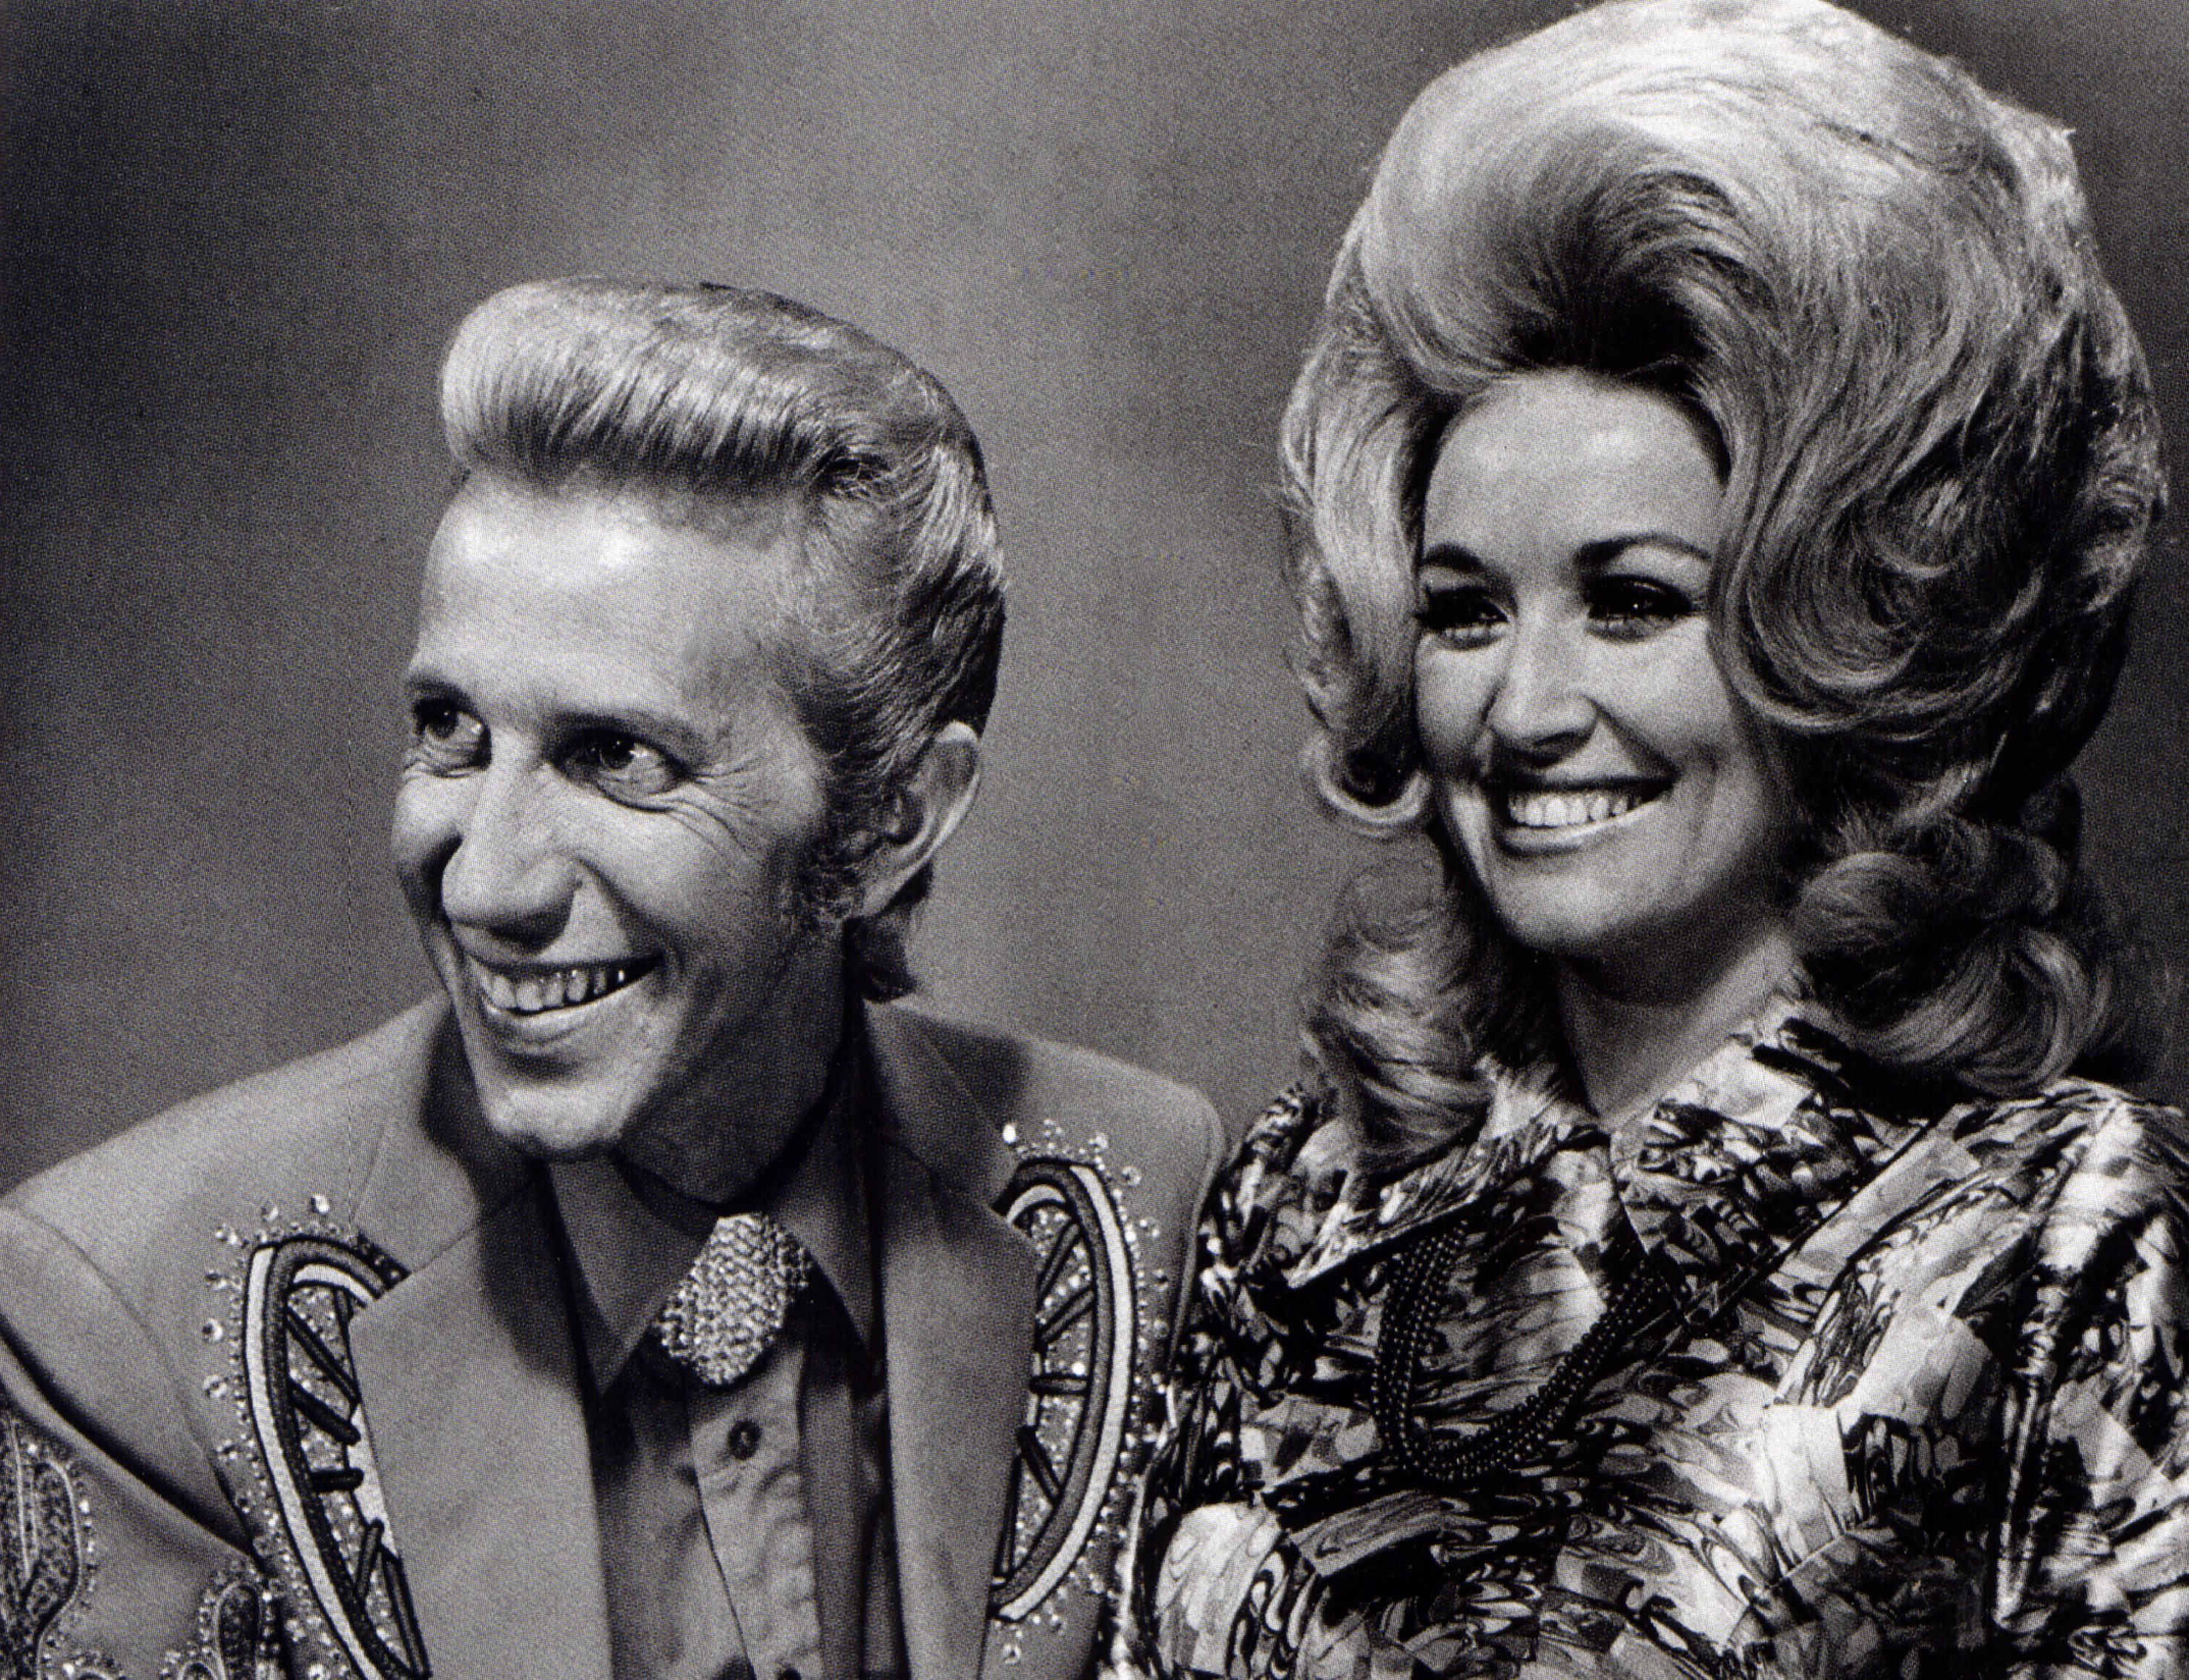 Porter Wagoner and Dolly Parton photographed together in black and white. They're both looking to the left of the camera.